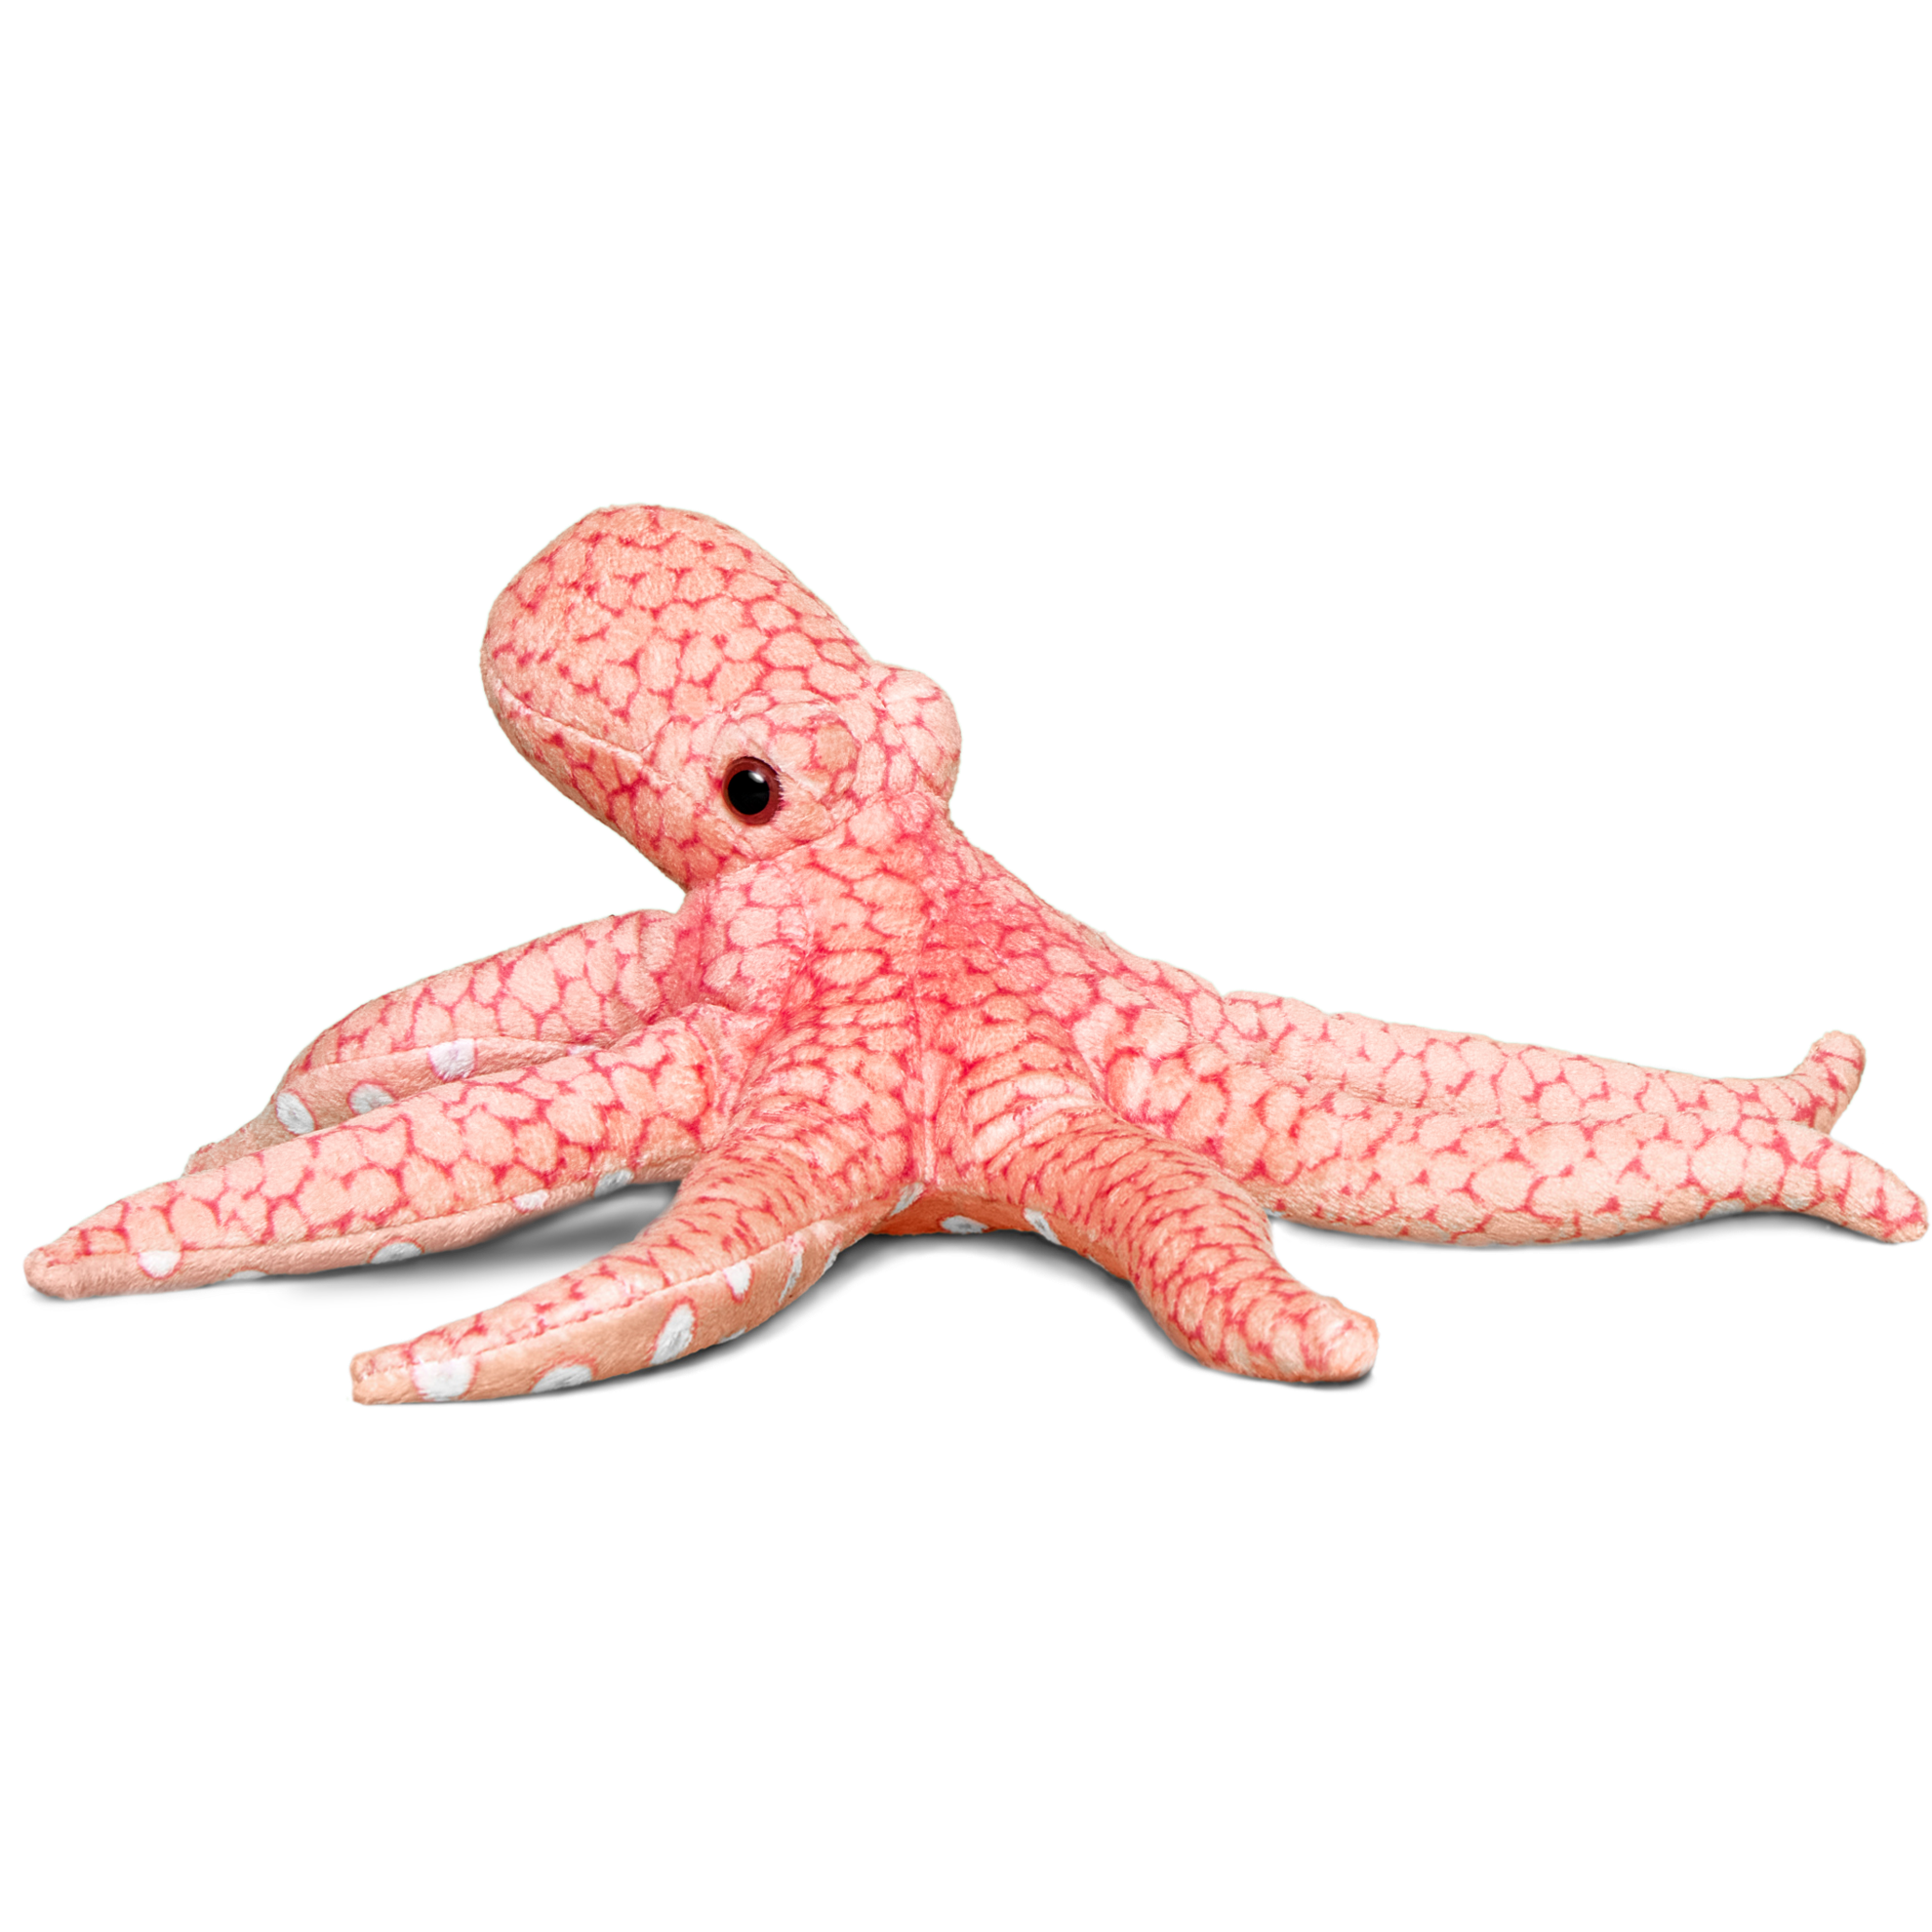 Adopt a Giant Pacific Octopus | Plush & Certificate Gift Kits